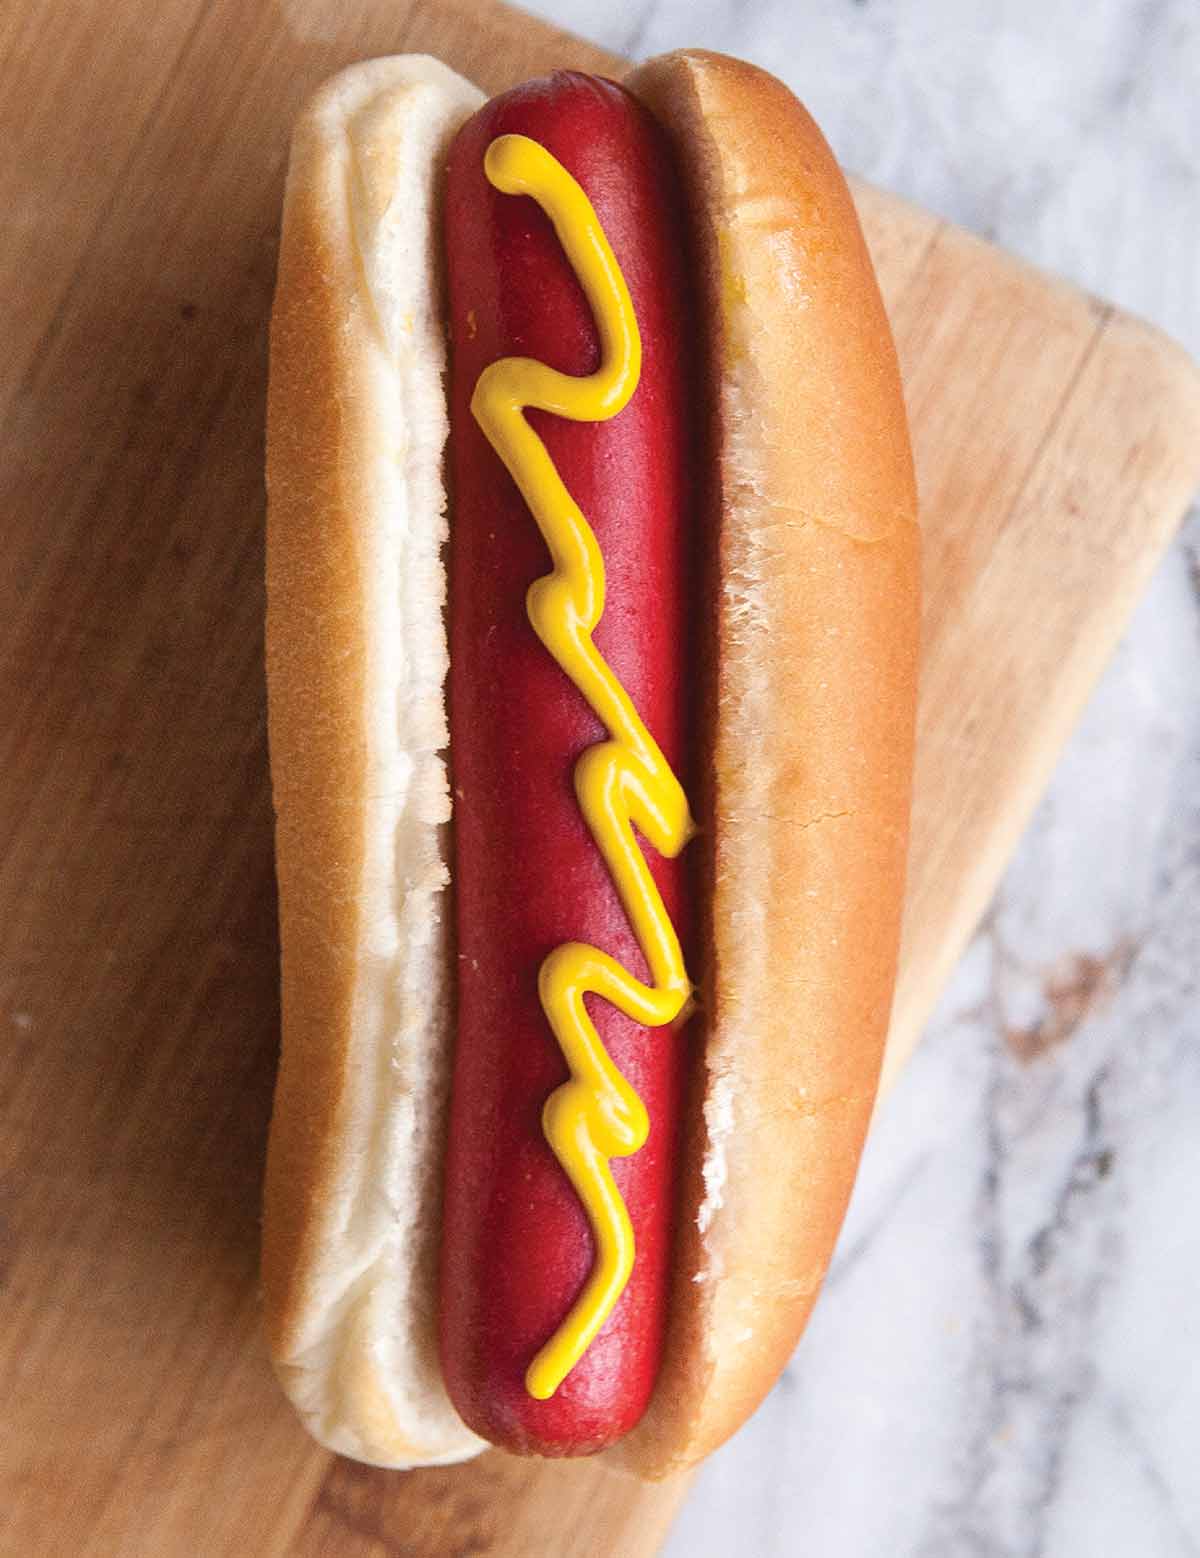 A perfect hot dog in a white bun, topped with a squiggle of mustard.